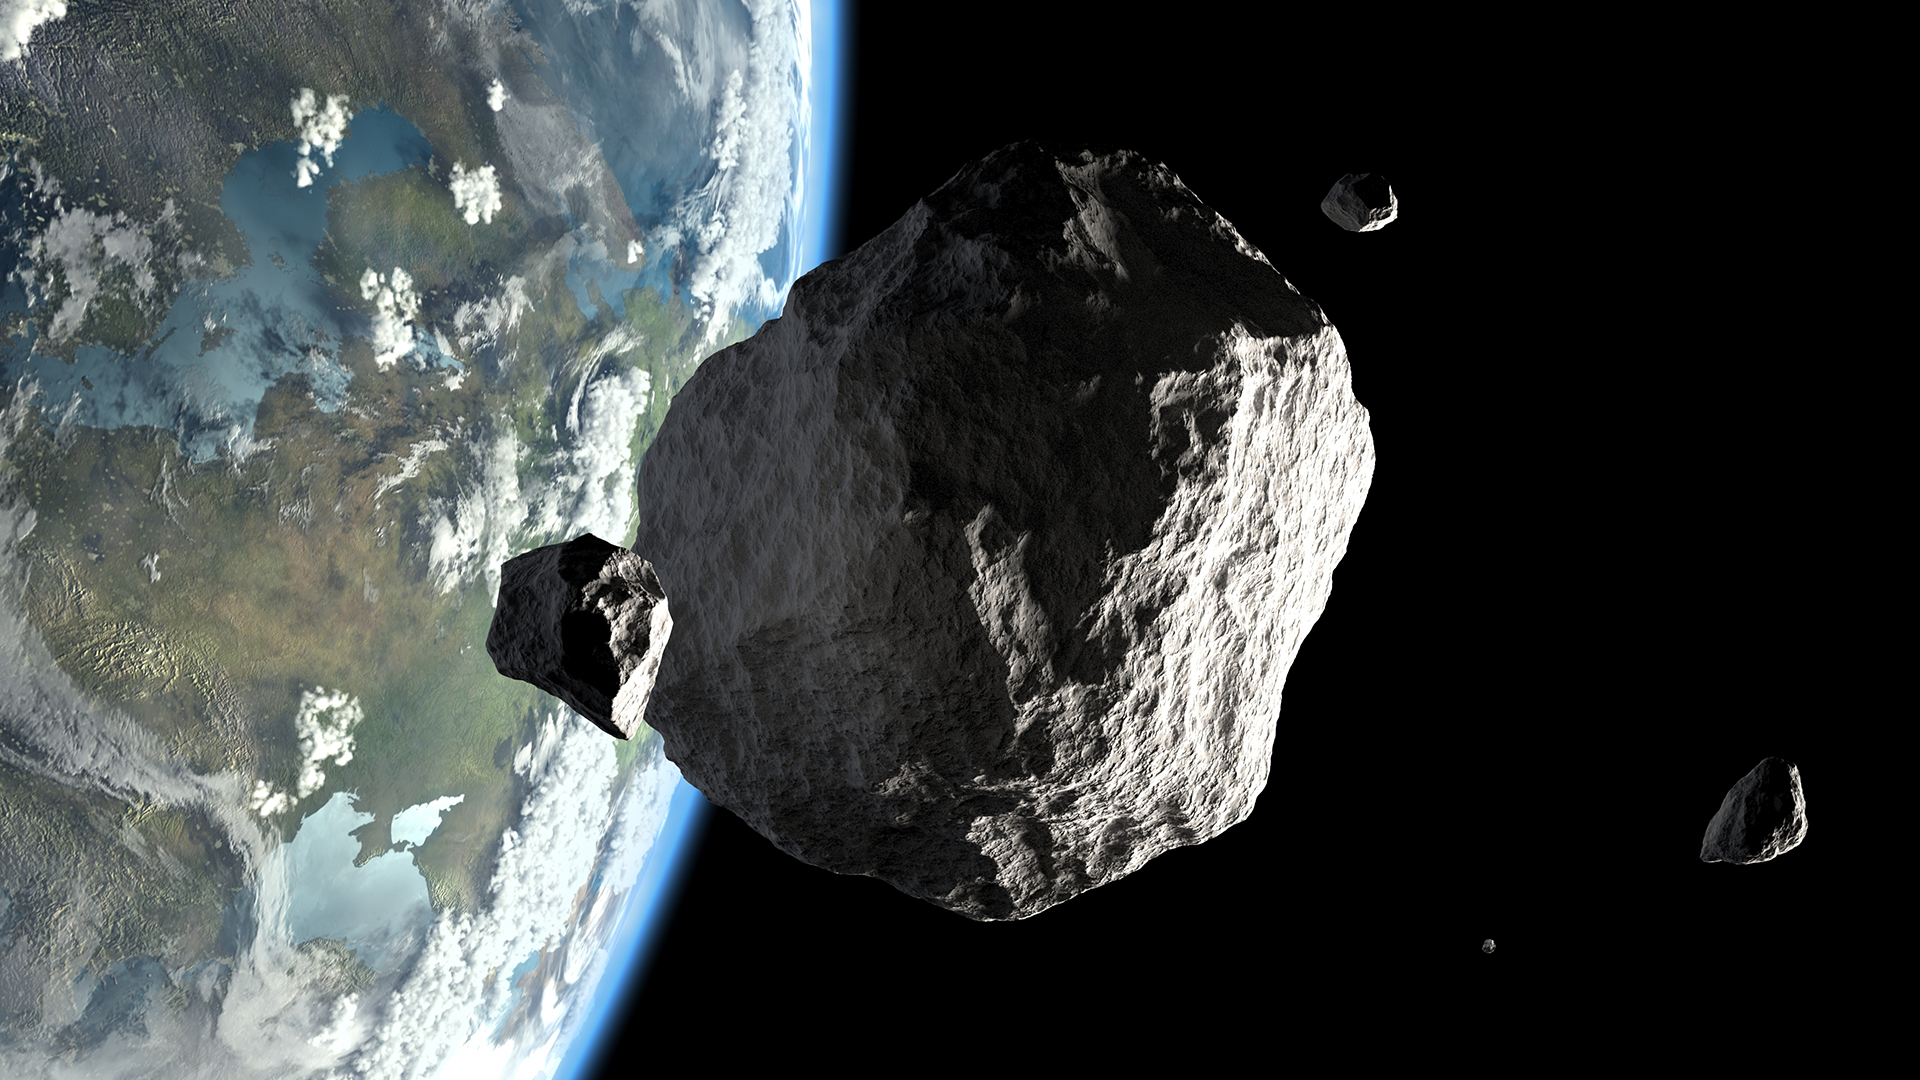 5 asteroids will skim past Earth over the next 2 days, NASA says